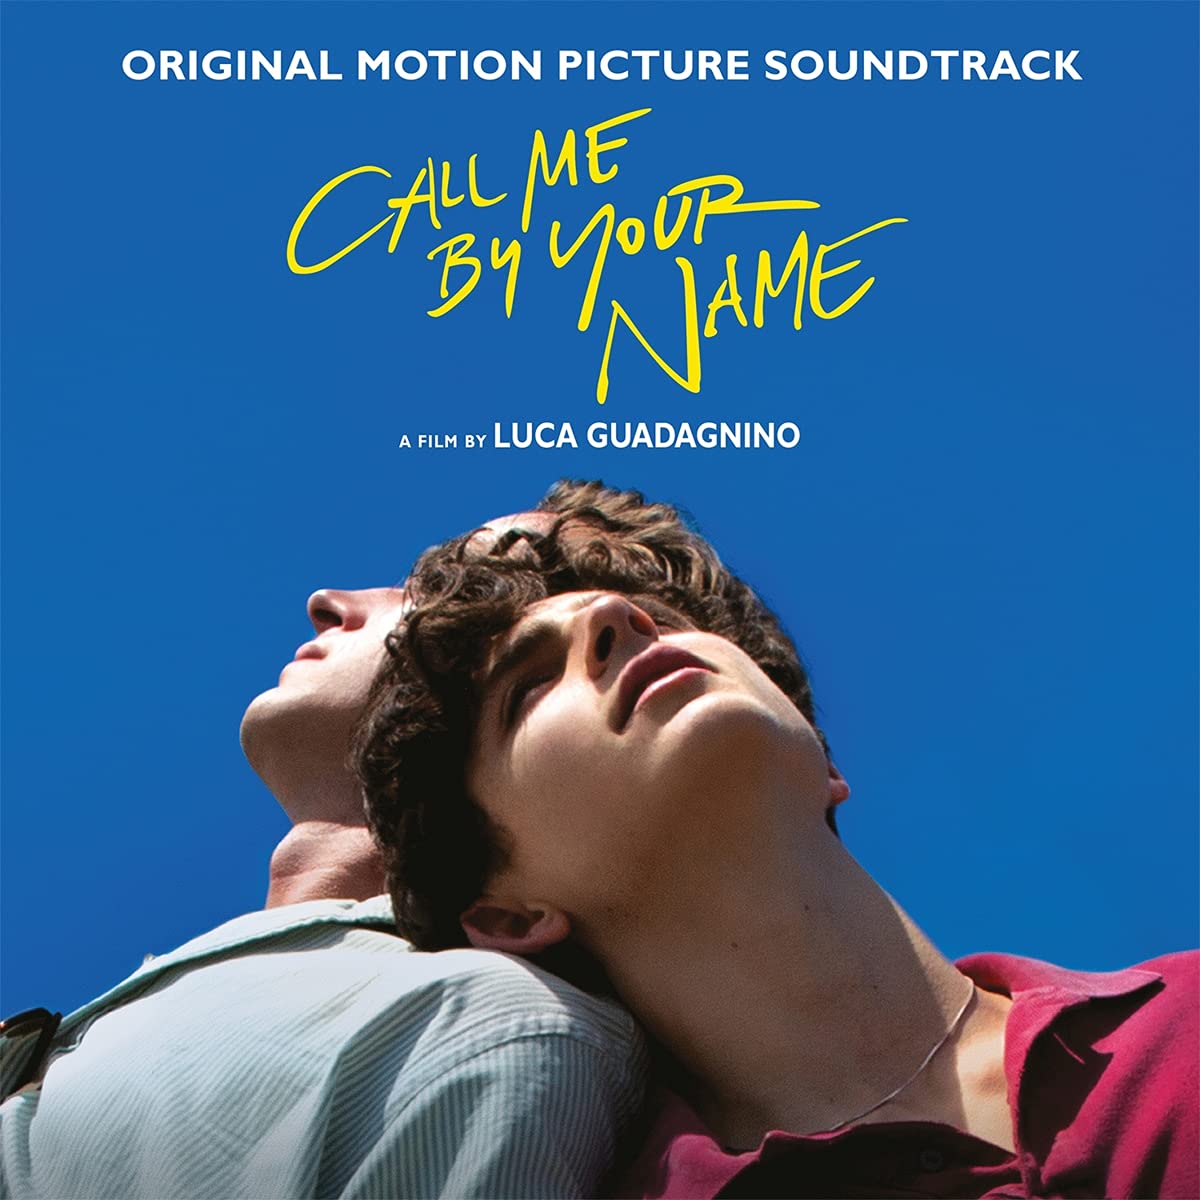 VARIOUS - CALL ME BY YOUR NAME OST (2LP)